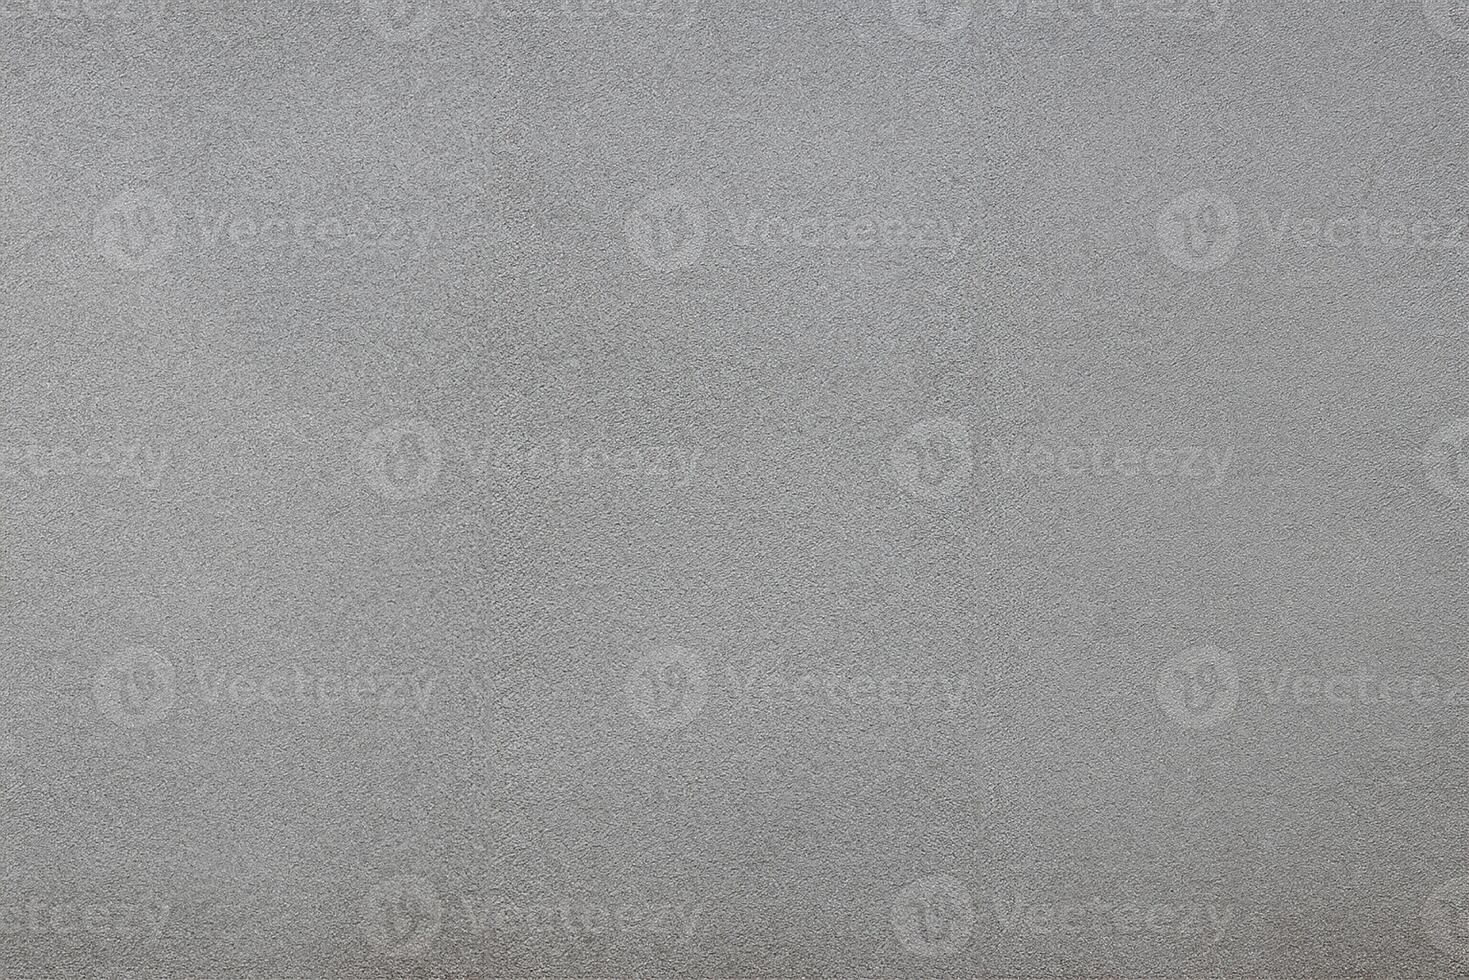 Abstract Gray Concrete Wall Texture Background photo